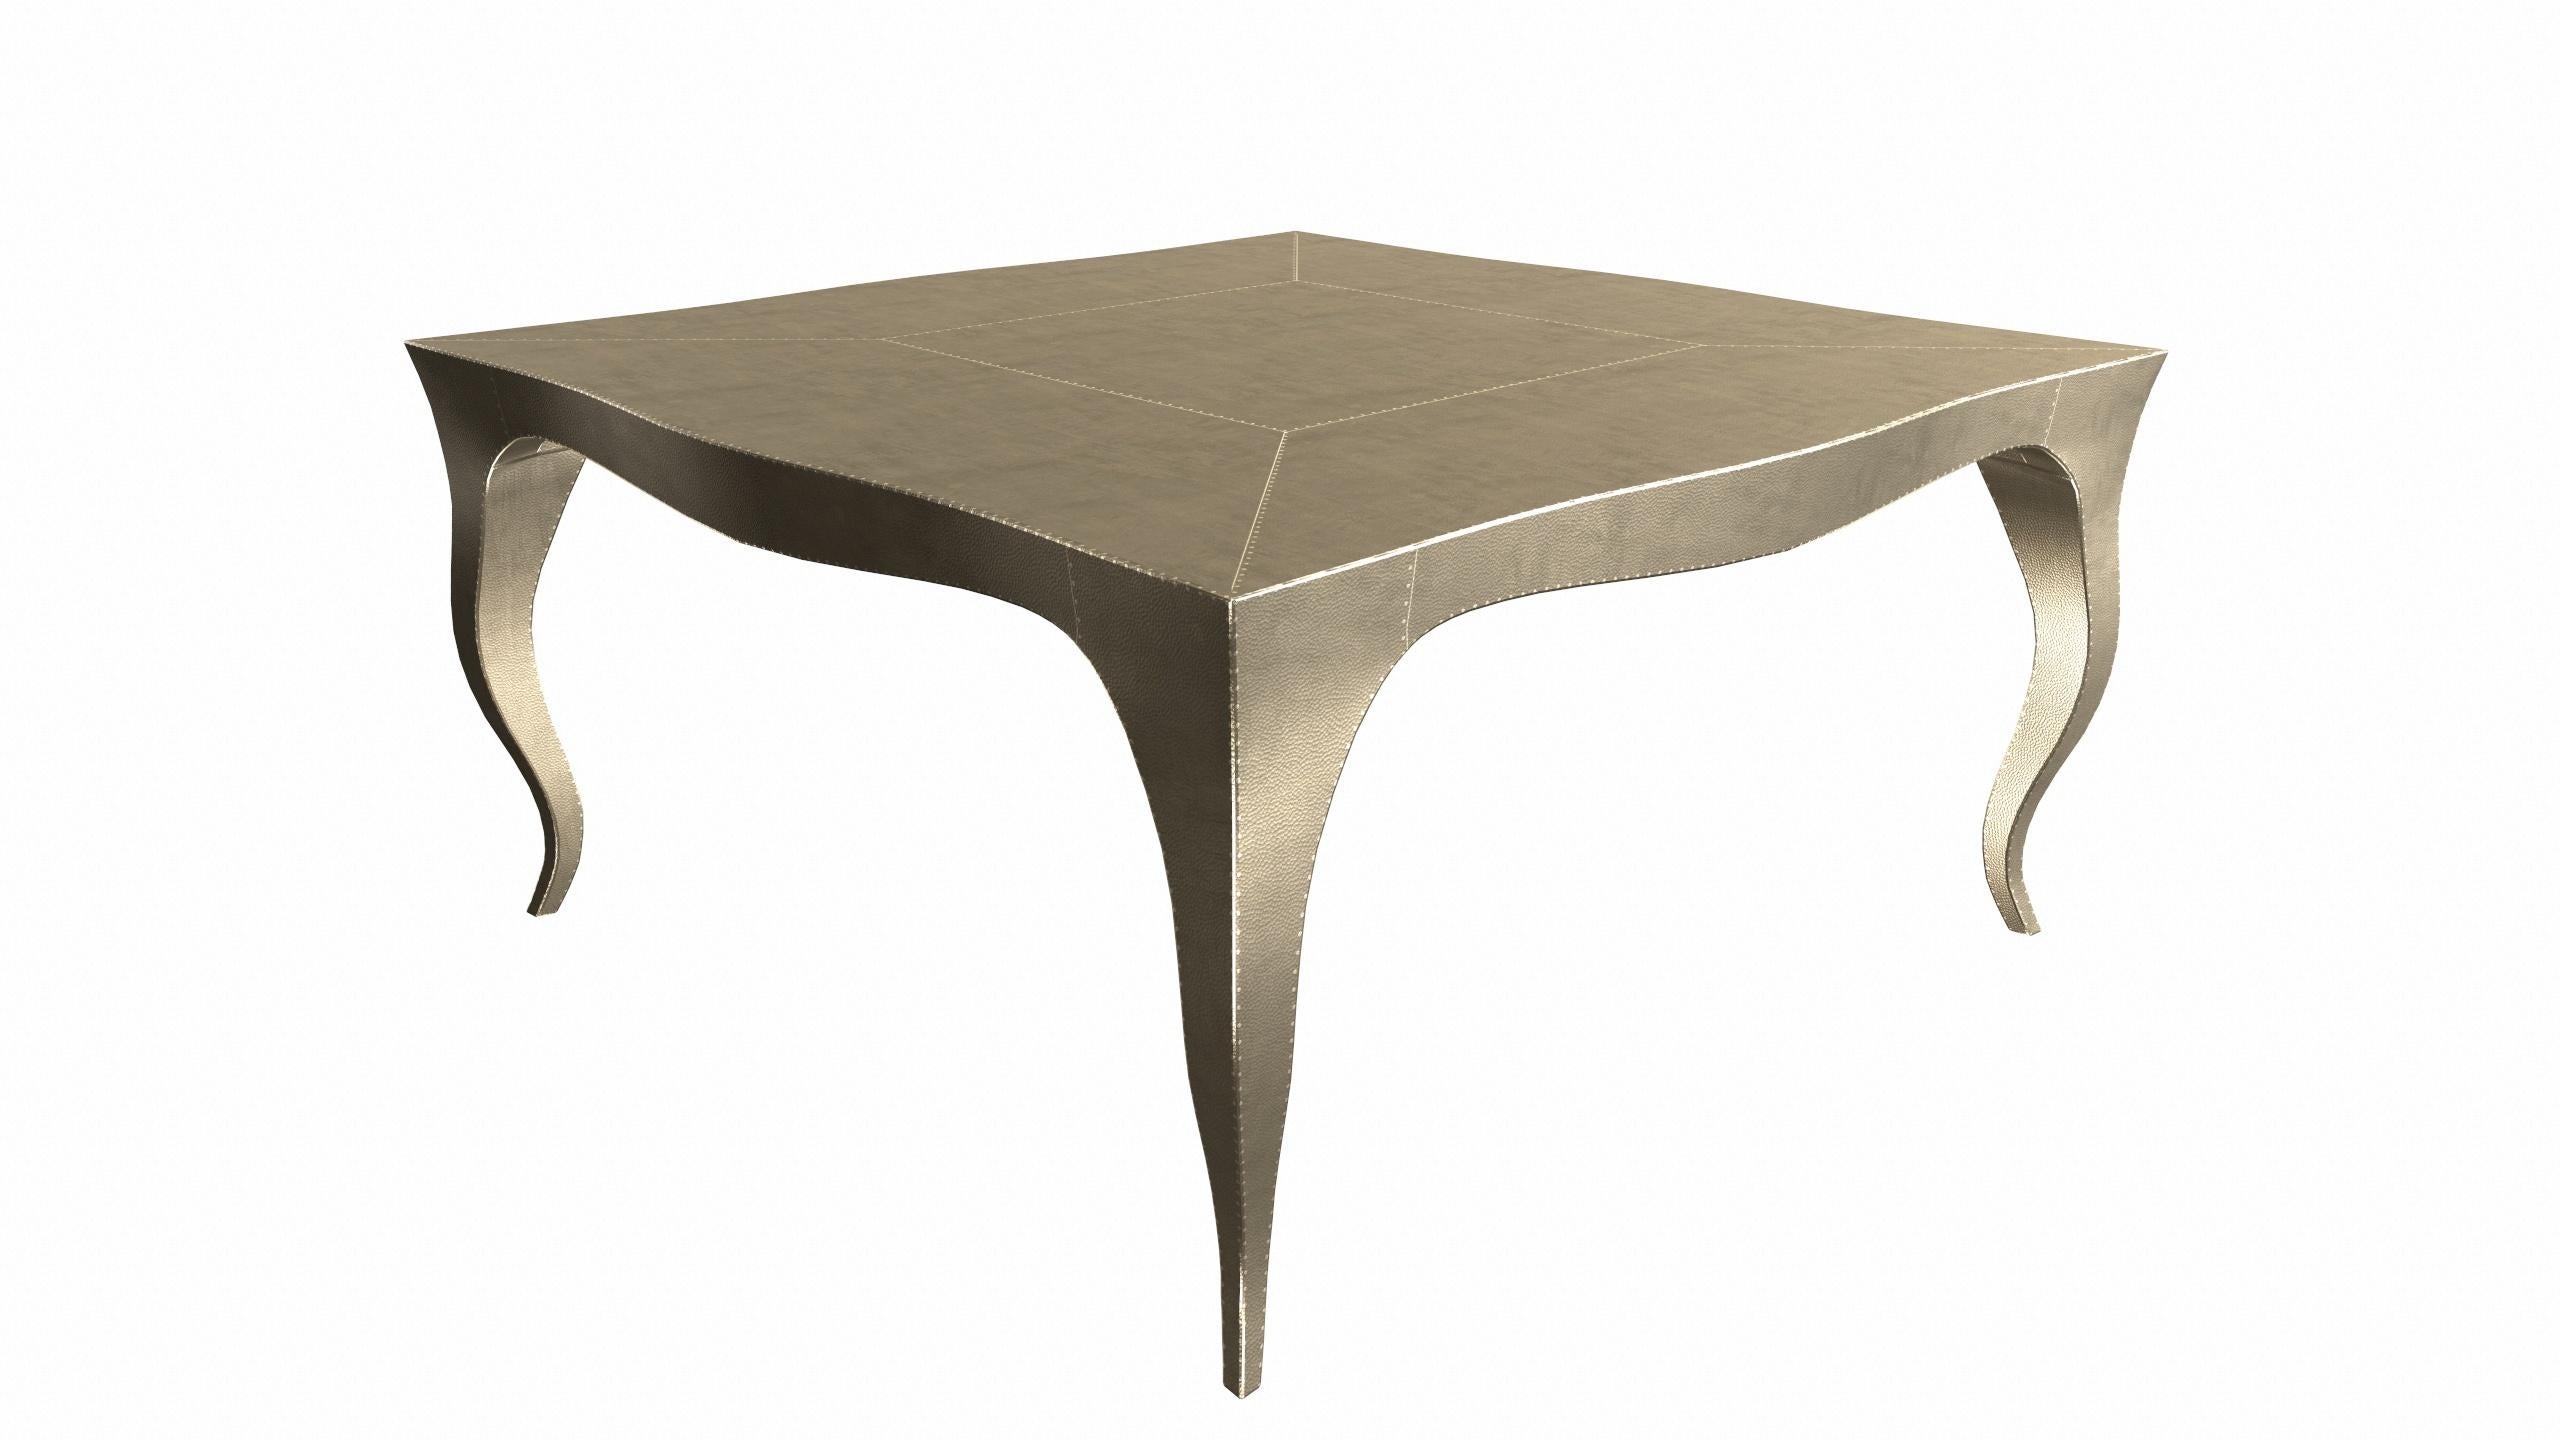 Other Louise Art Deco Coffee and Cocktail Tables Mid. Hammered Brass by Paul Mathieu For Sale